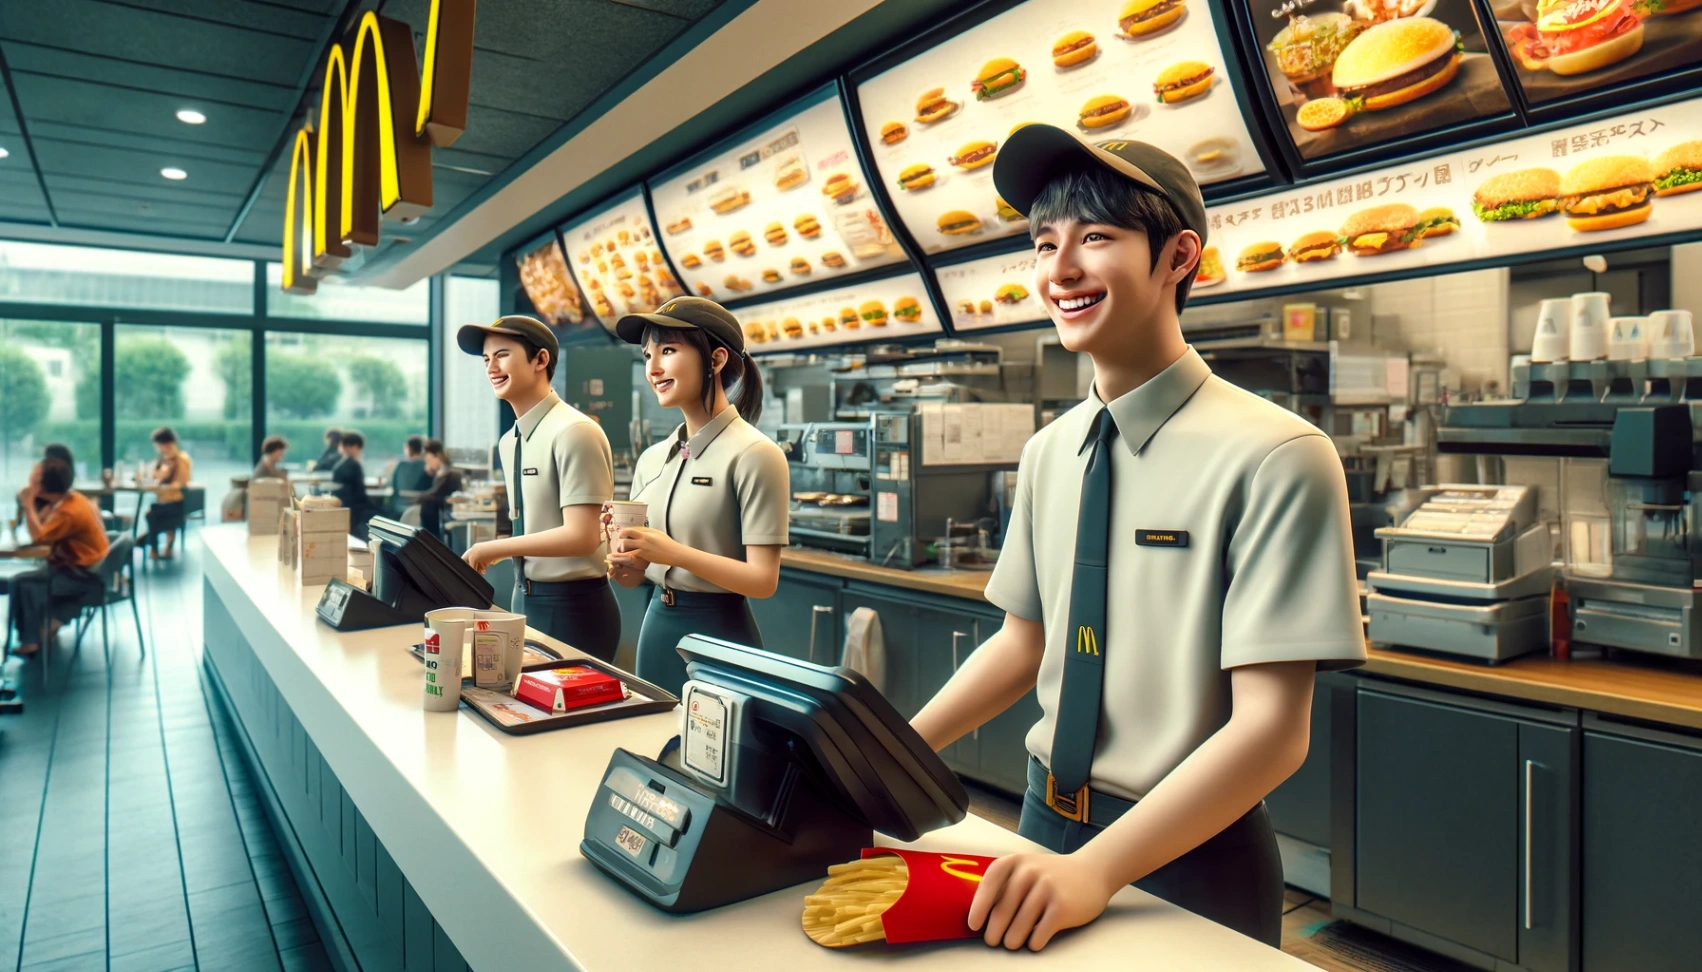 McDonald's Jobs: How to Apply for Job Openings